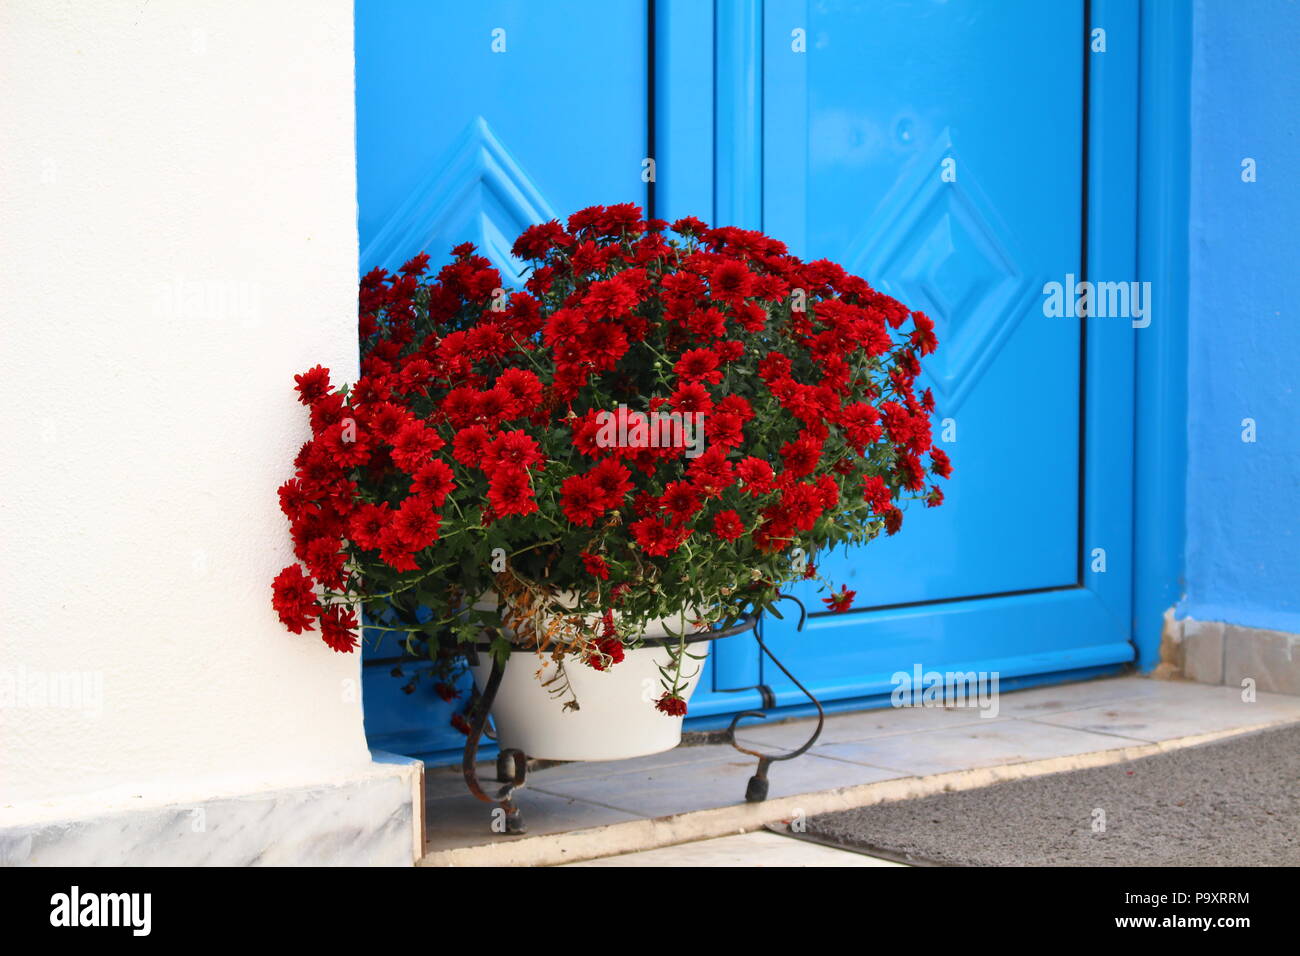 White pot with red flowers in front of a blue door Stock Photo